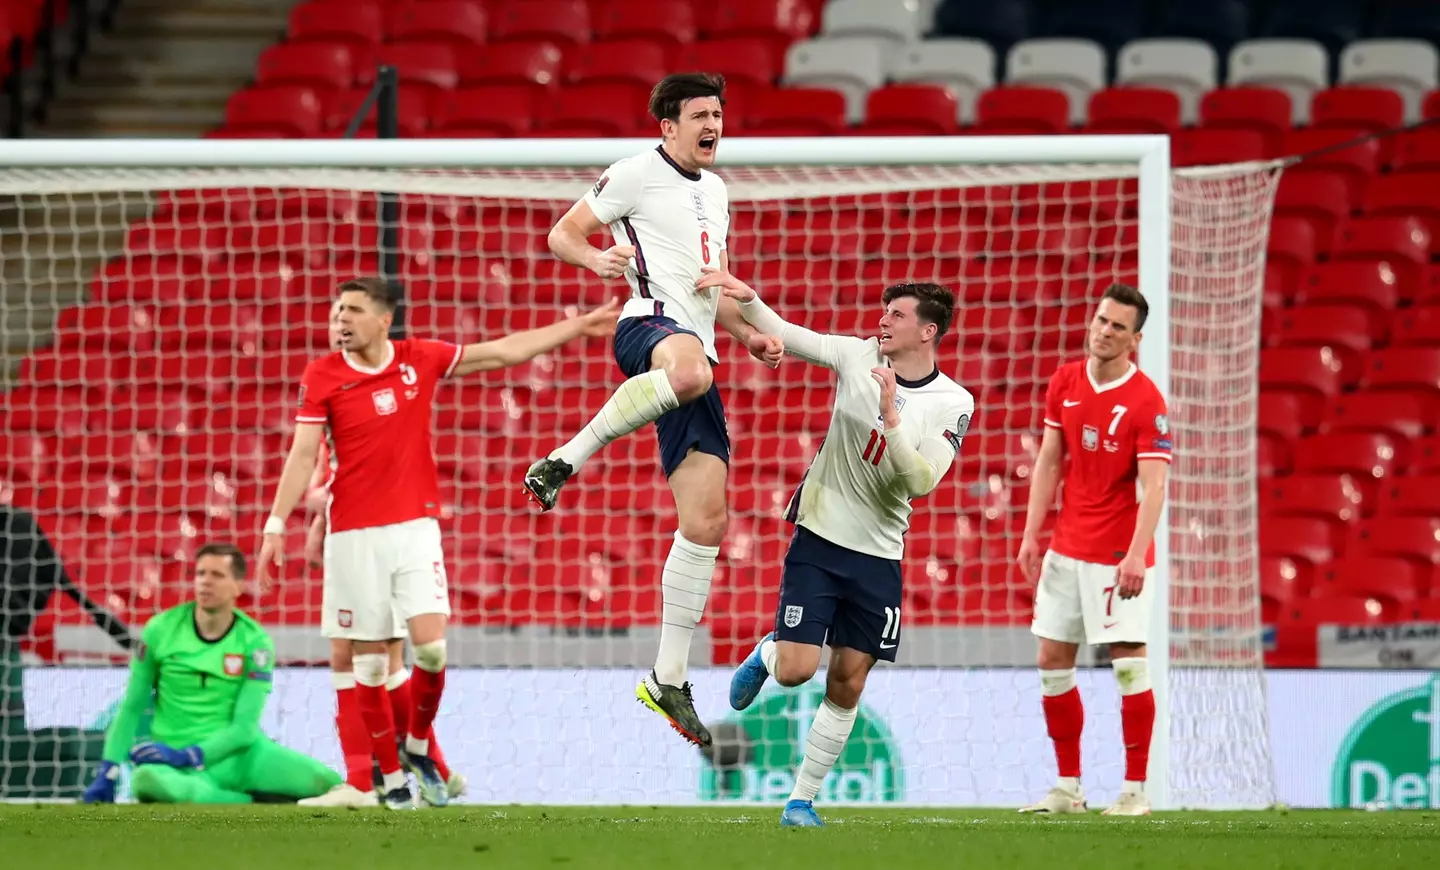 Harry Maguire scored against Poland last time out at Wembley. (Alamy)